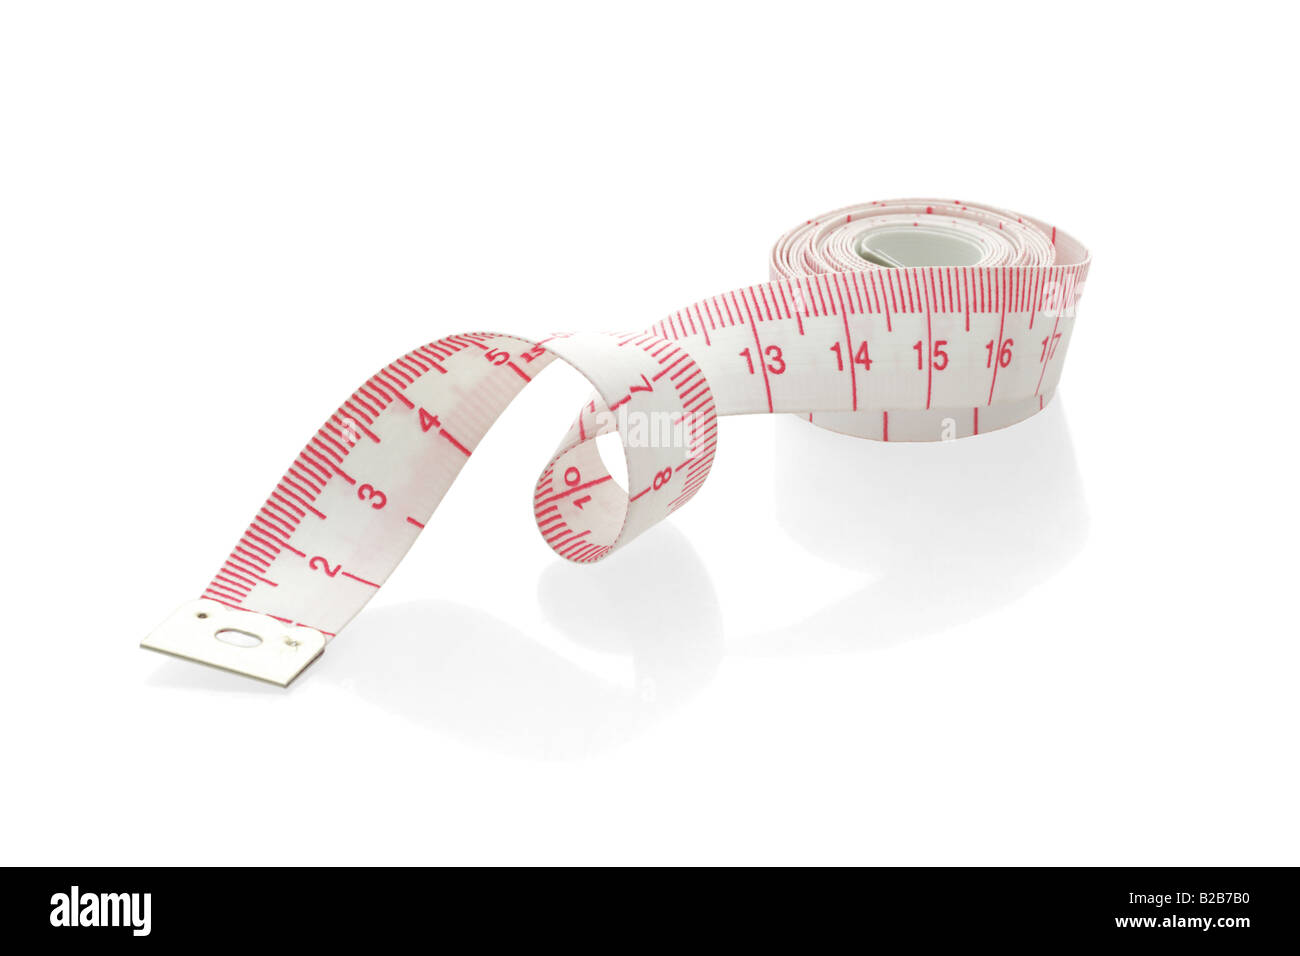 Measuring tape in metric unit on white background Stock Photo